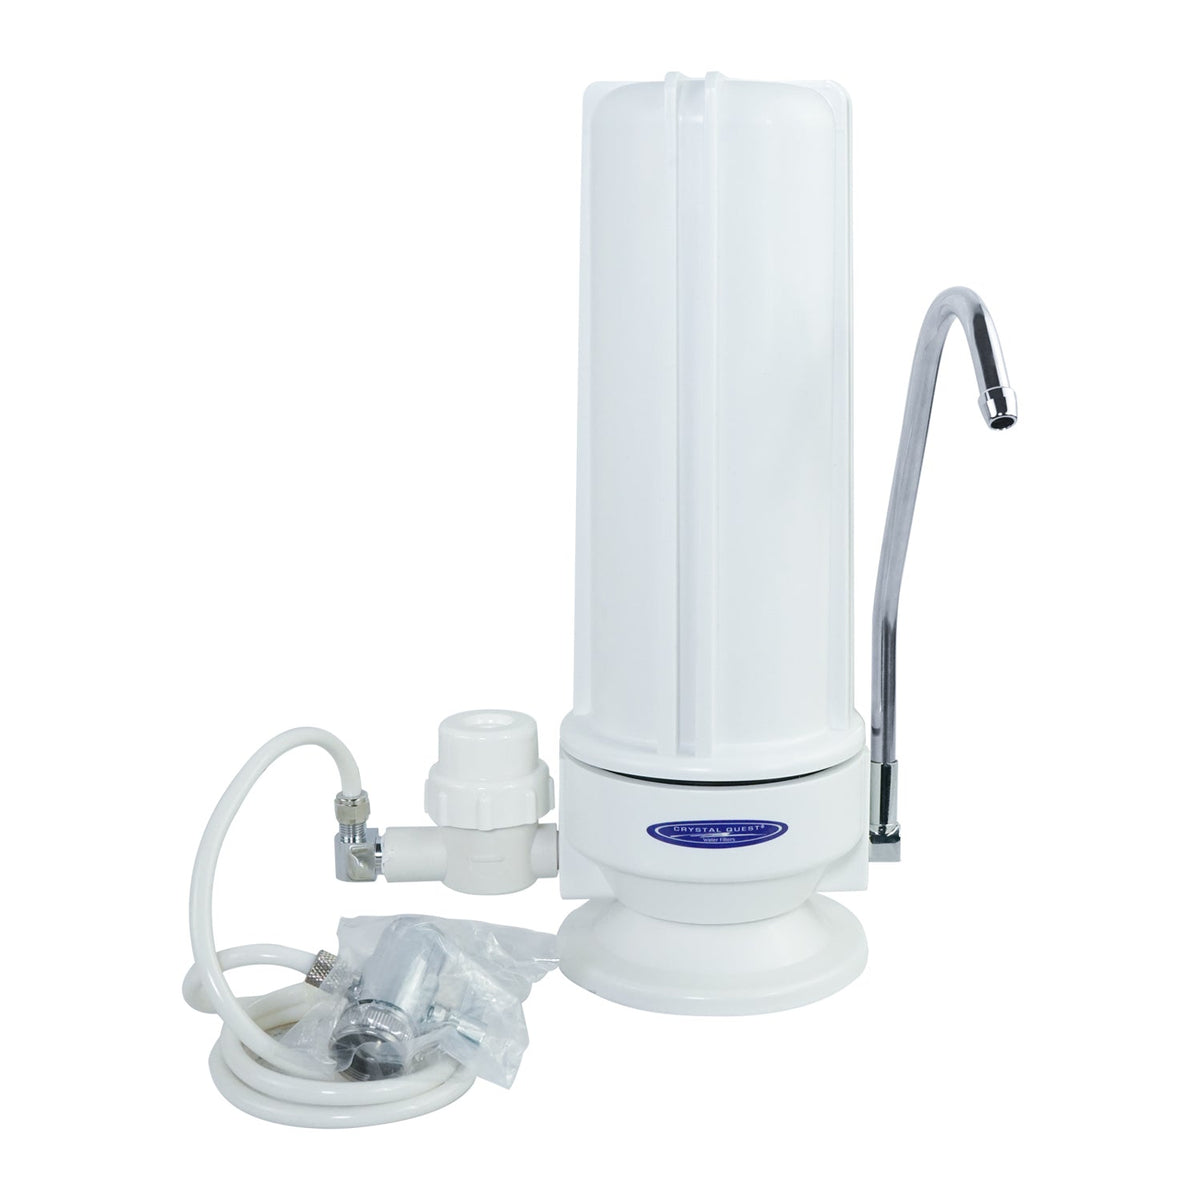 Fluoride Countertop Water Filter System - Countertop Water Filters - Crystal Quest